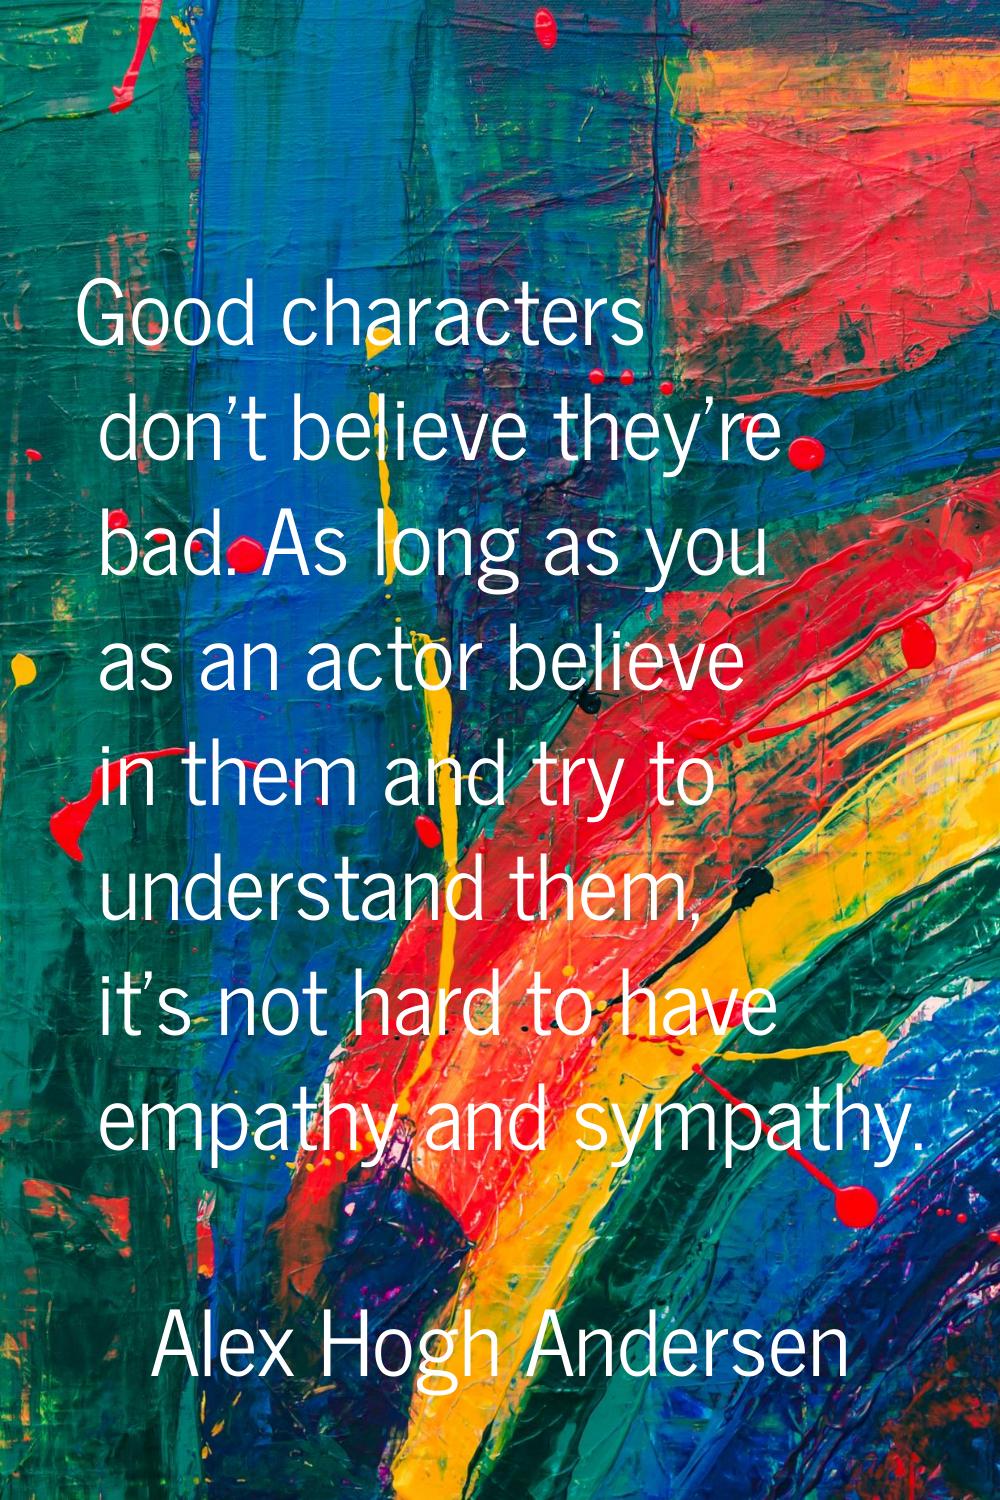 Good characters don't believe they're bad. As long as you as an actor believe in them and try to un